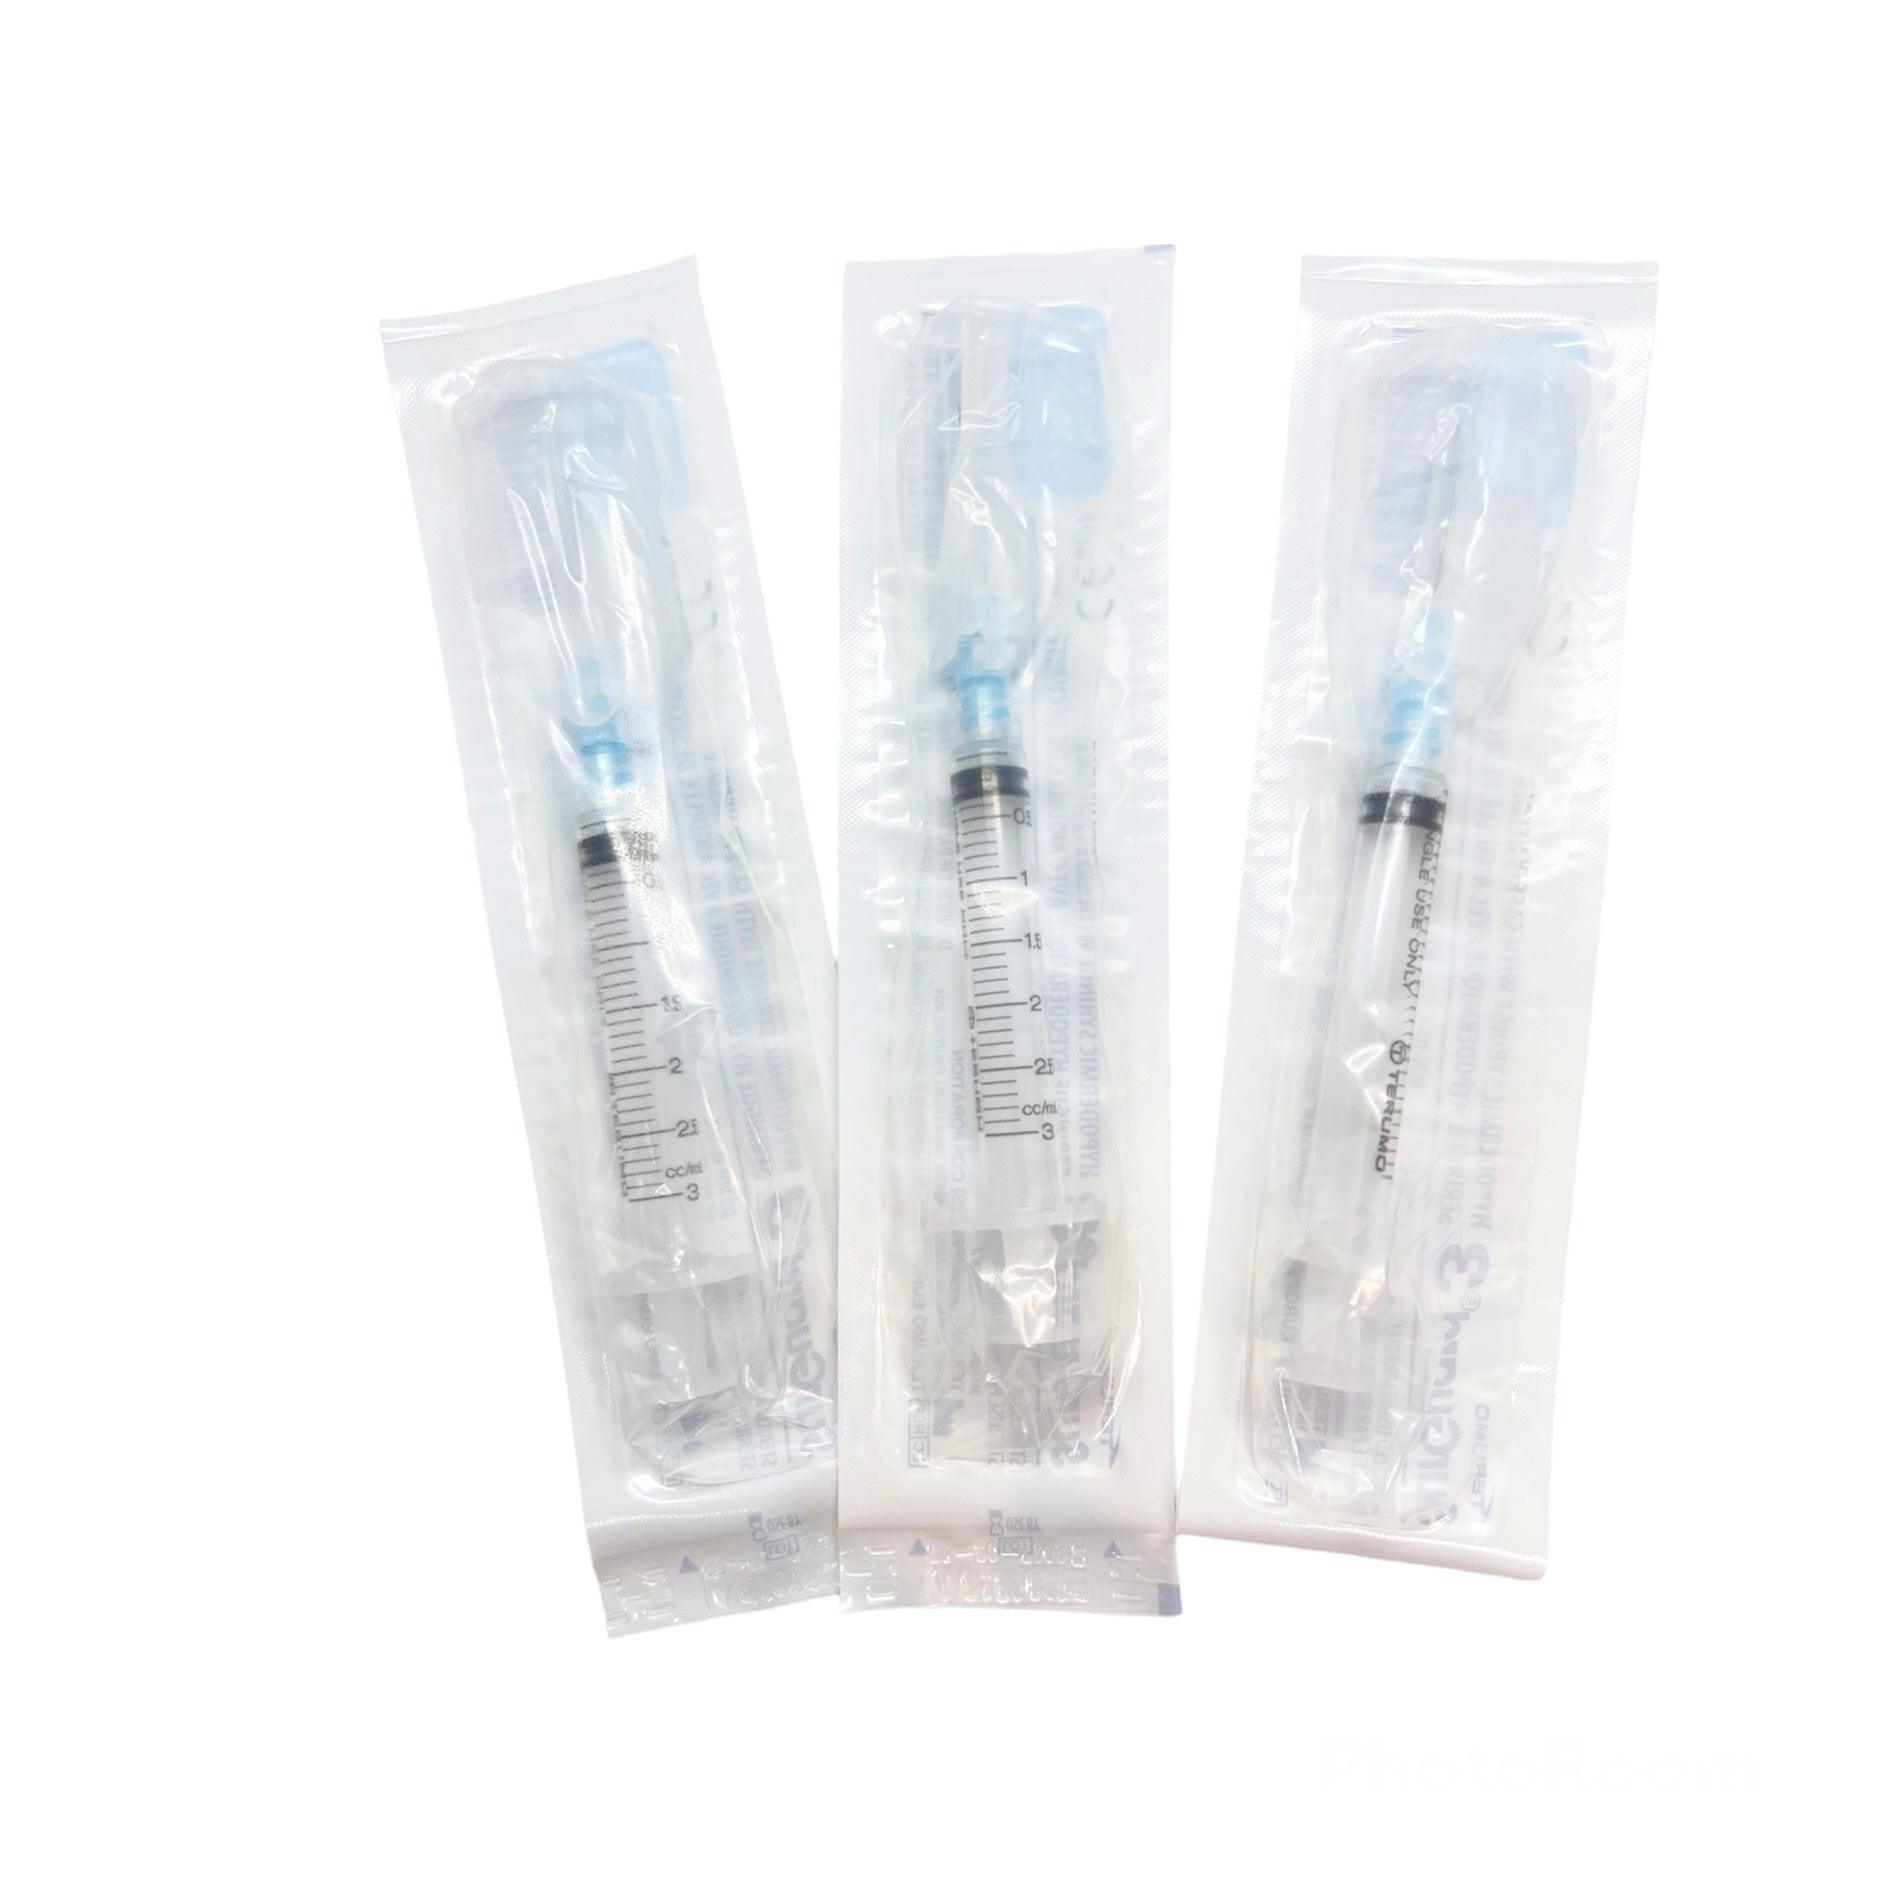 3 mL | 23G x 1" - Terumo SG3-03L2325 Hypodermic Syringes with Safety Needle | SurGuard 3 | 100 per Box